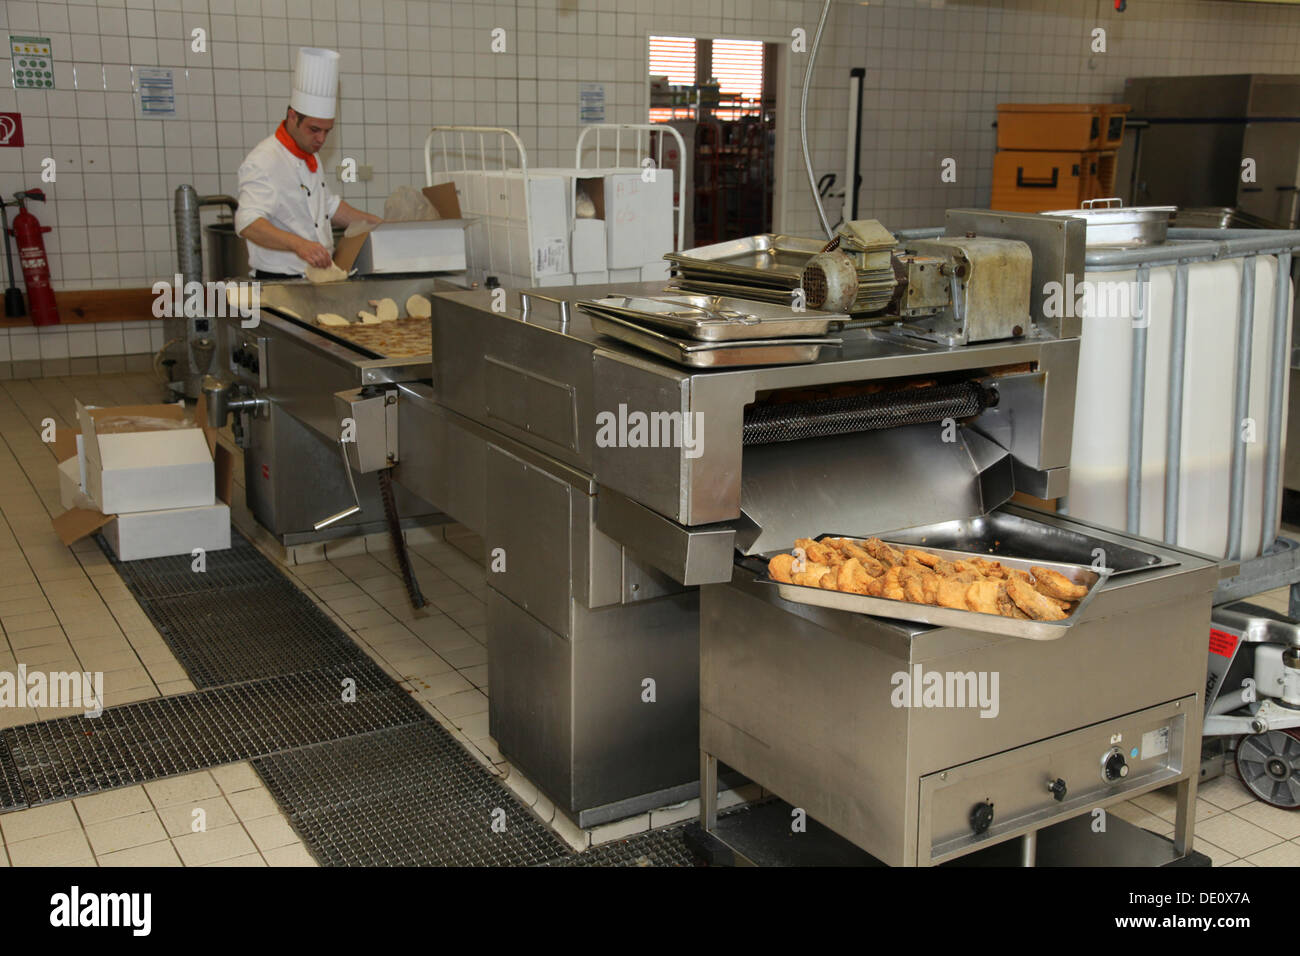 Preparation of ready-made frozen chips in the commercial kitchen of the Student Union of the Free University of Berlin Stock Photo